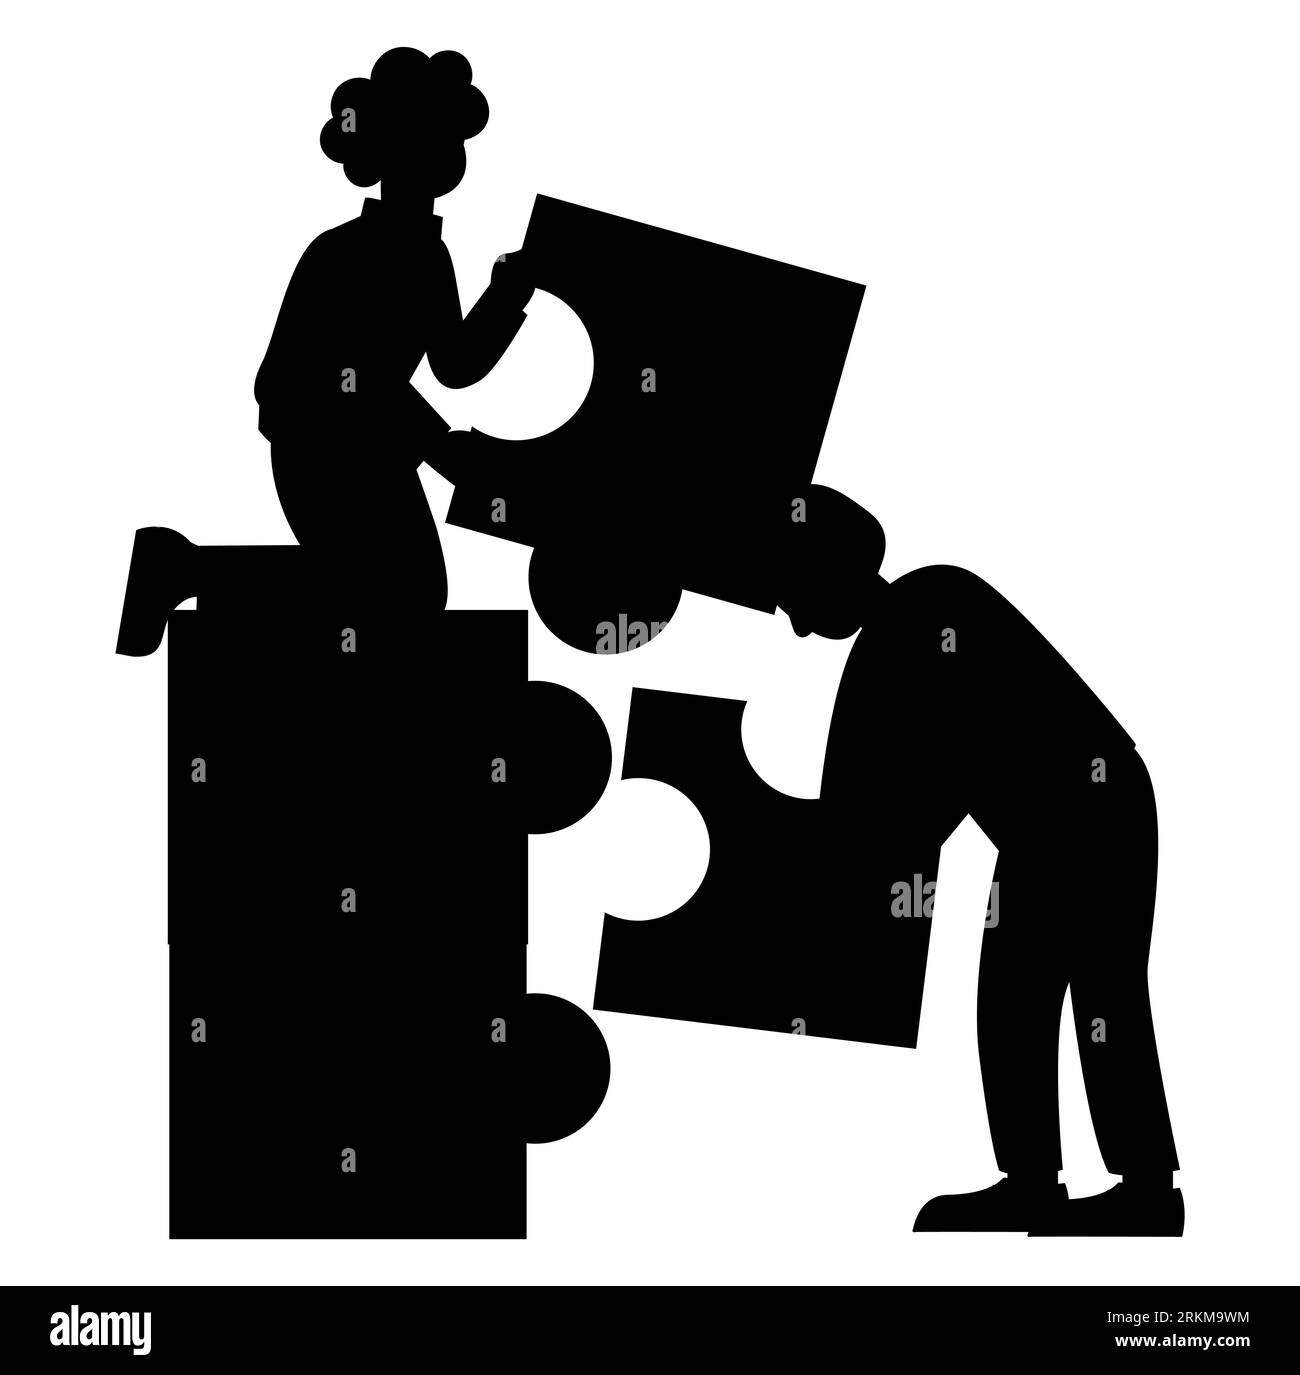 Black silhouette of colleagues with puzzle pieces, Teamwork, problem-solving, brainstorming unique ideas and skills, vector isolated on white Stock Vector